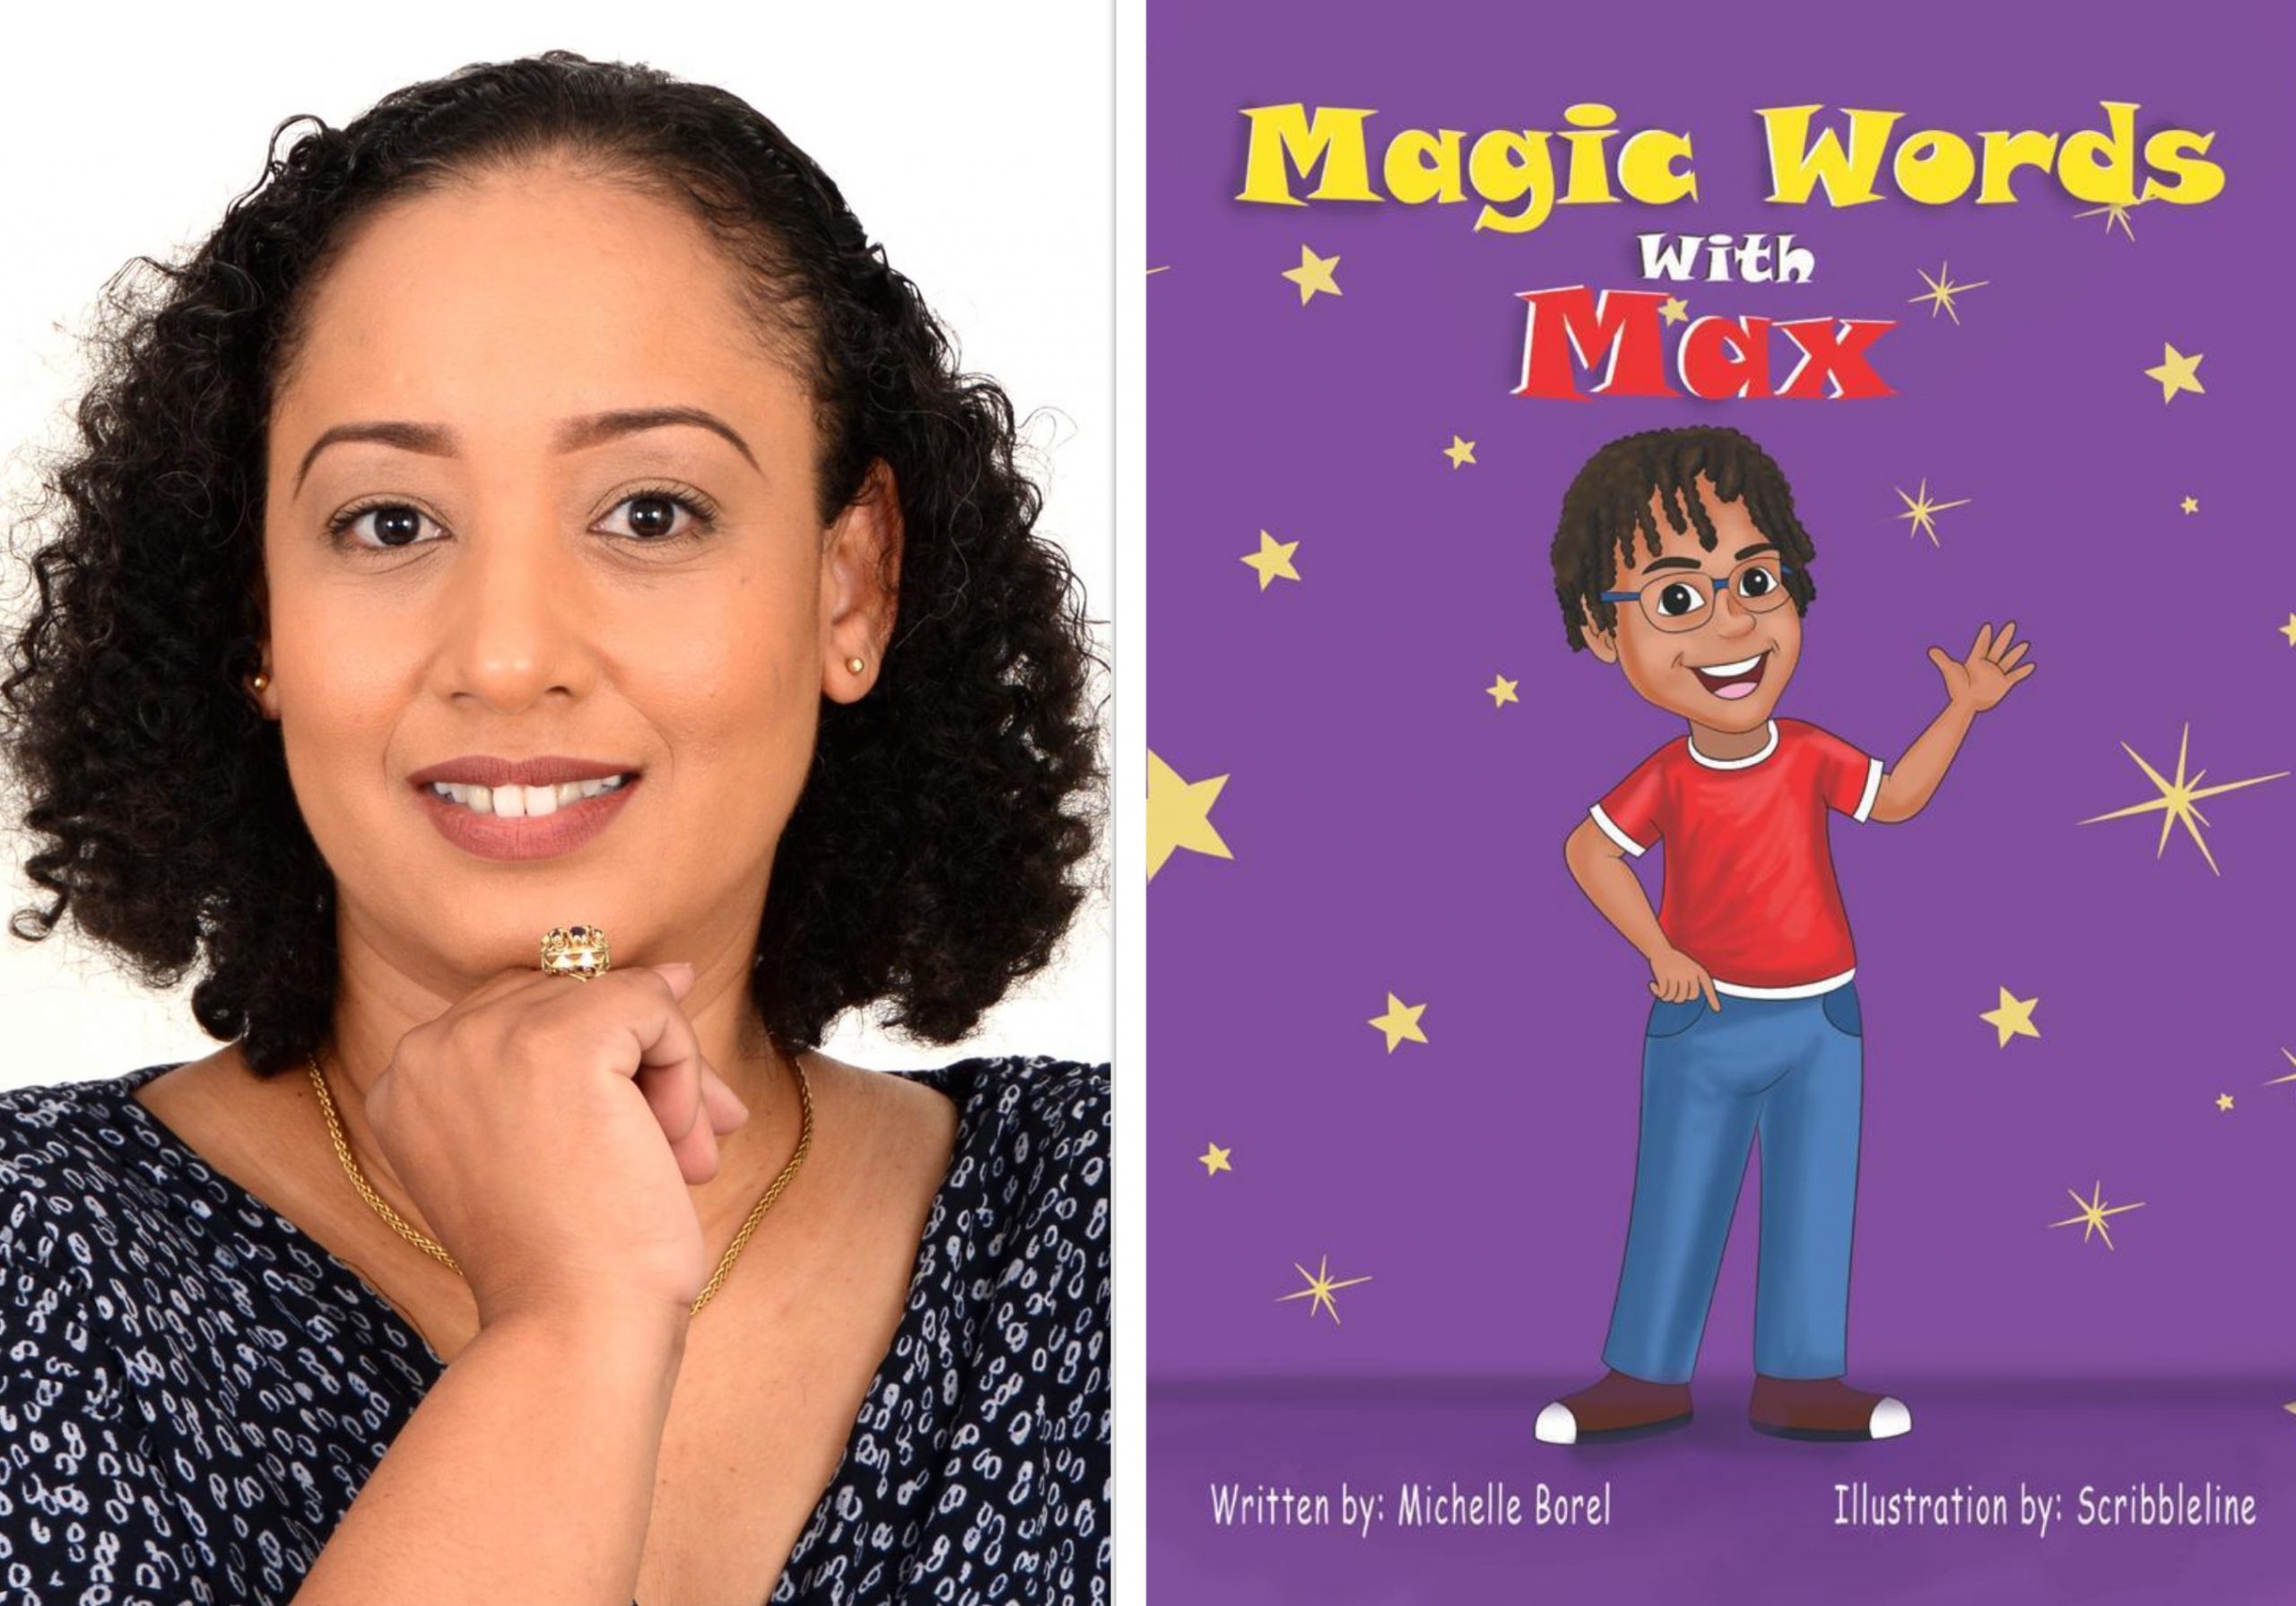 Michelle Borel is teaching children the value of using Magic Words